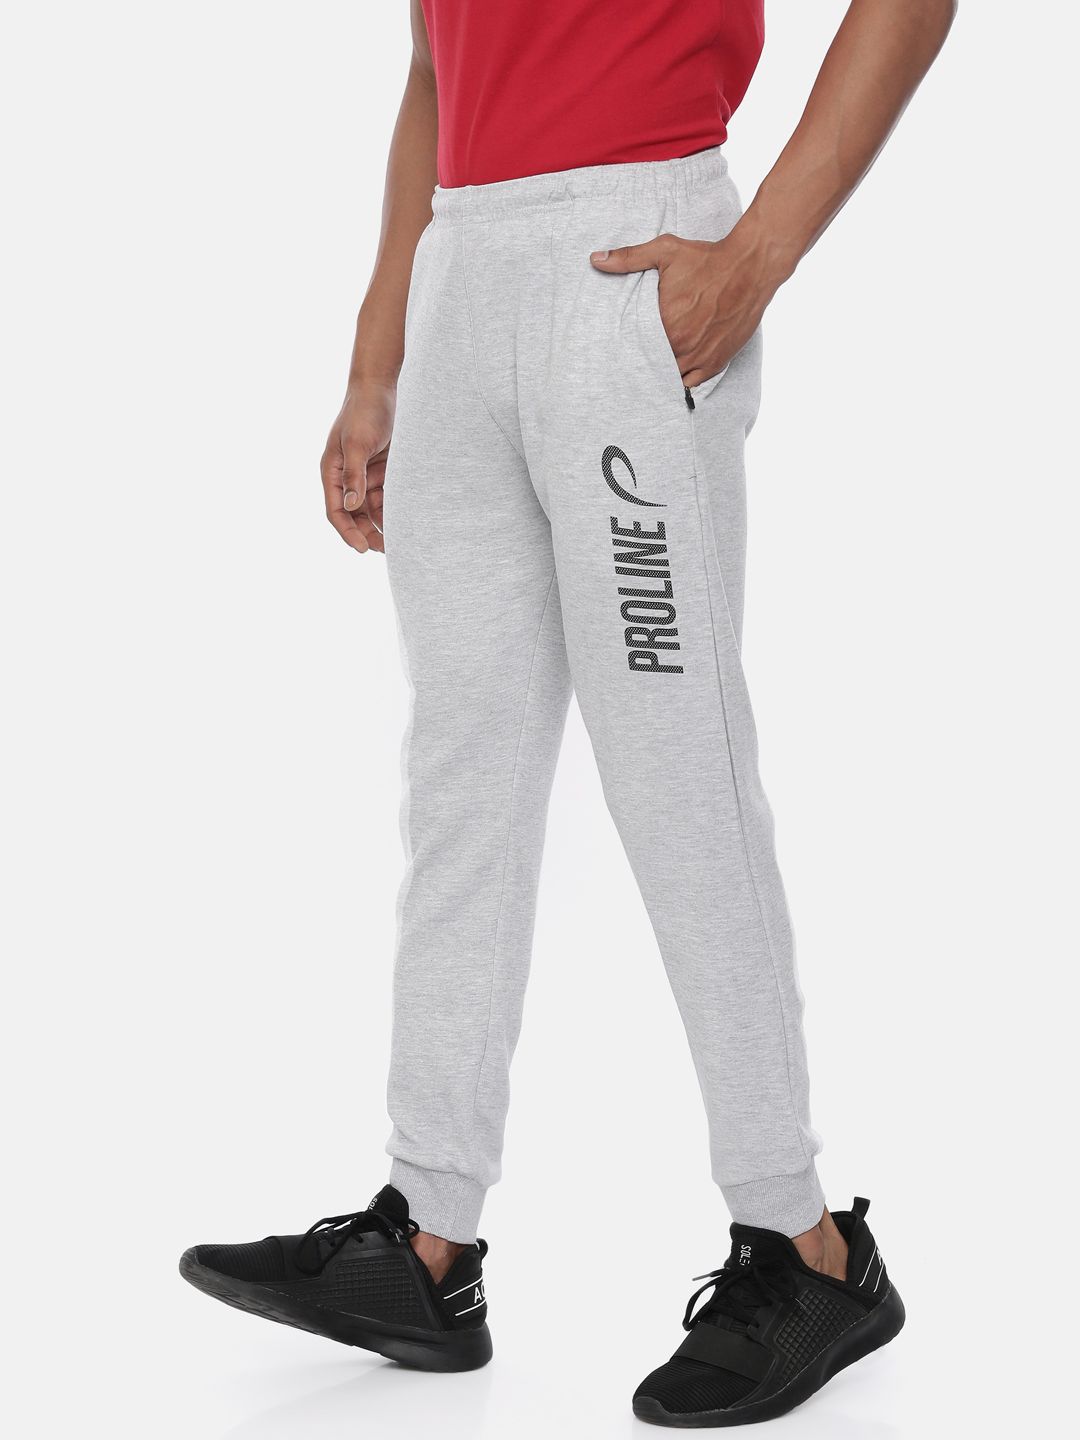 Jeans & Trousers | Gym Pant Proline | Freeup